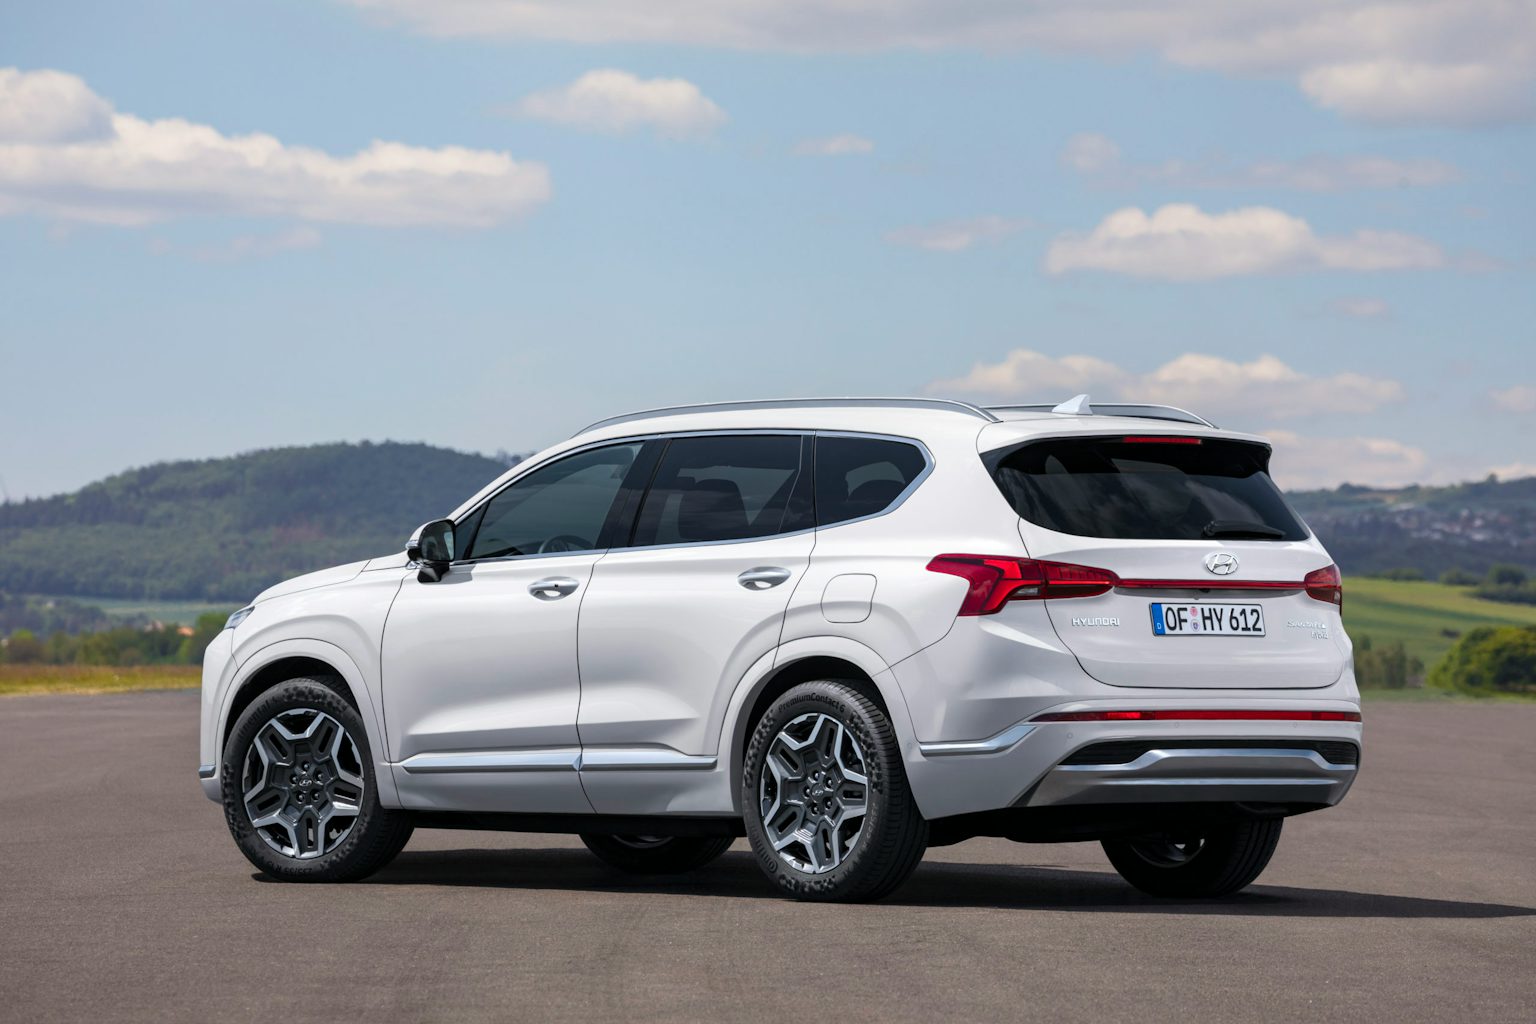 2021 Hyundai Santa Fe on sale now: prices and specs revealed | carwow